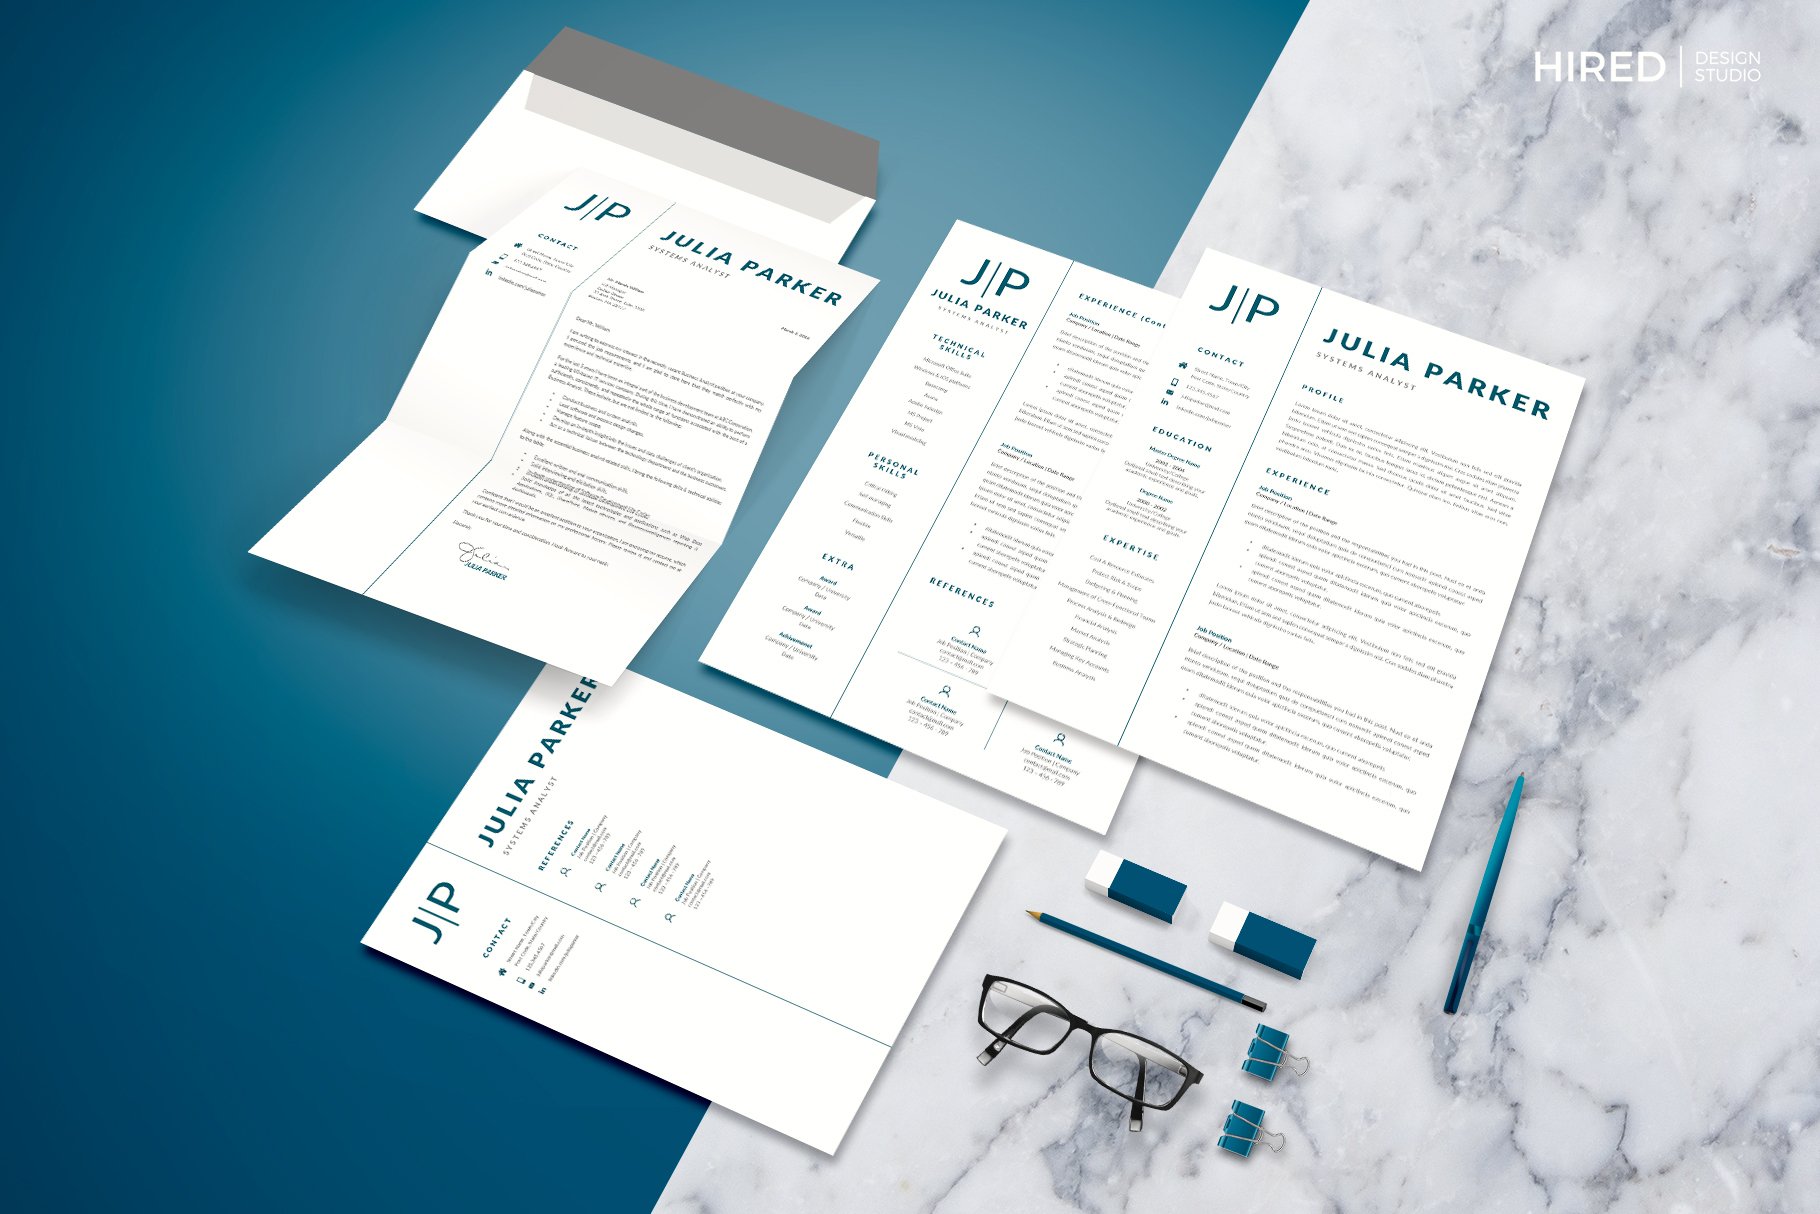 Set of three different resumes on a table.